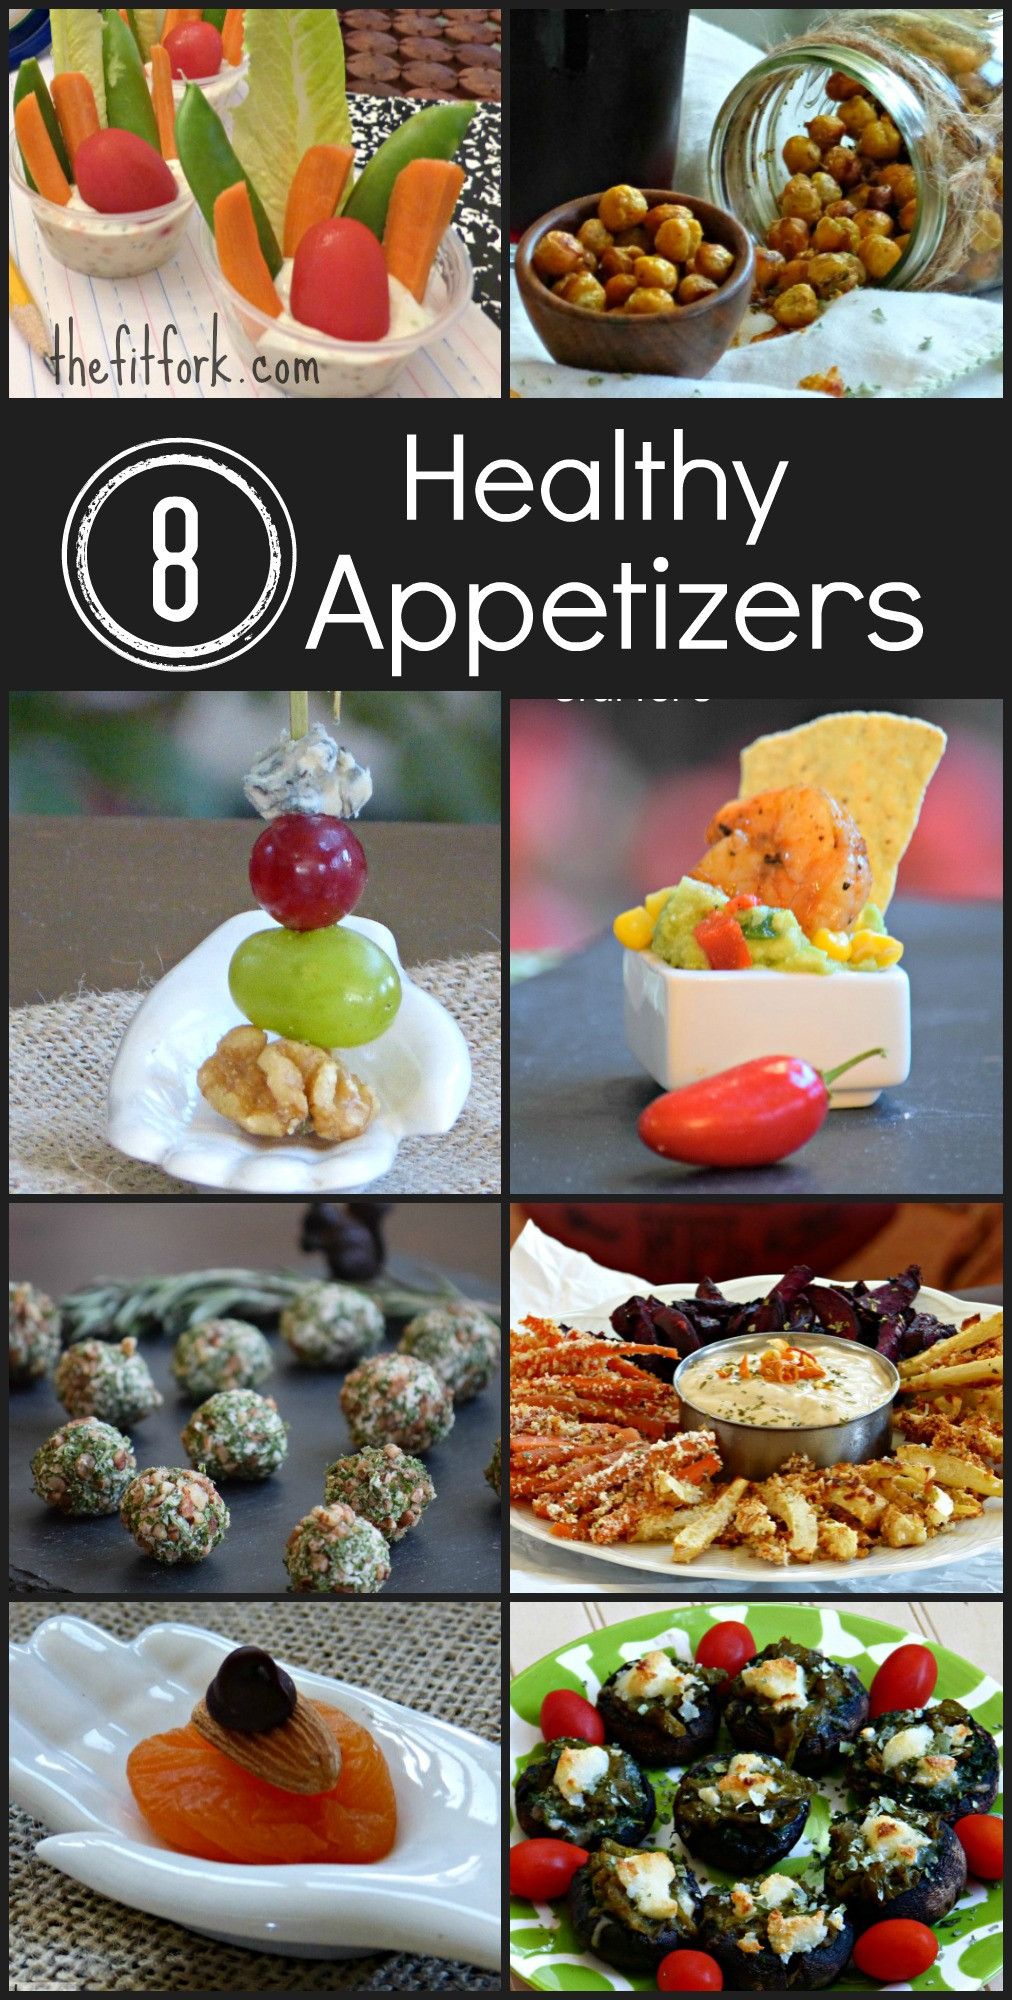 New Years Eve Party Appetizers
 Lettuce Party 8 Healthy Appetizers for New Year’s Eve